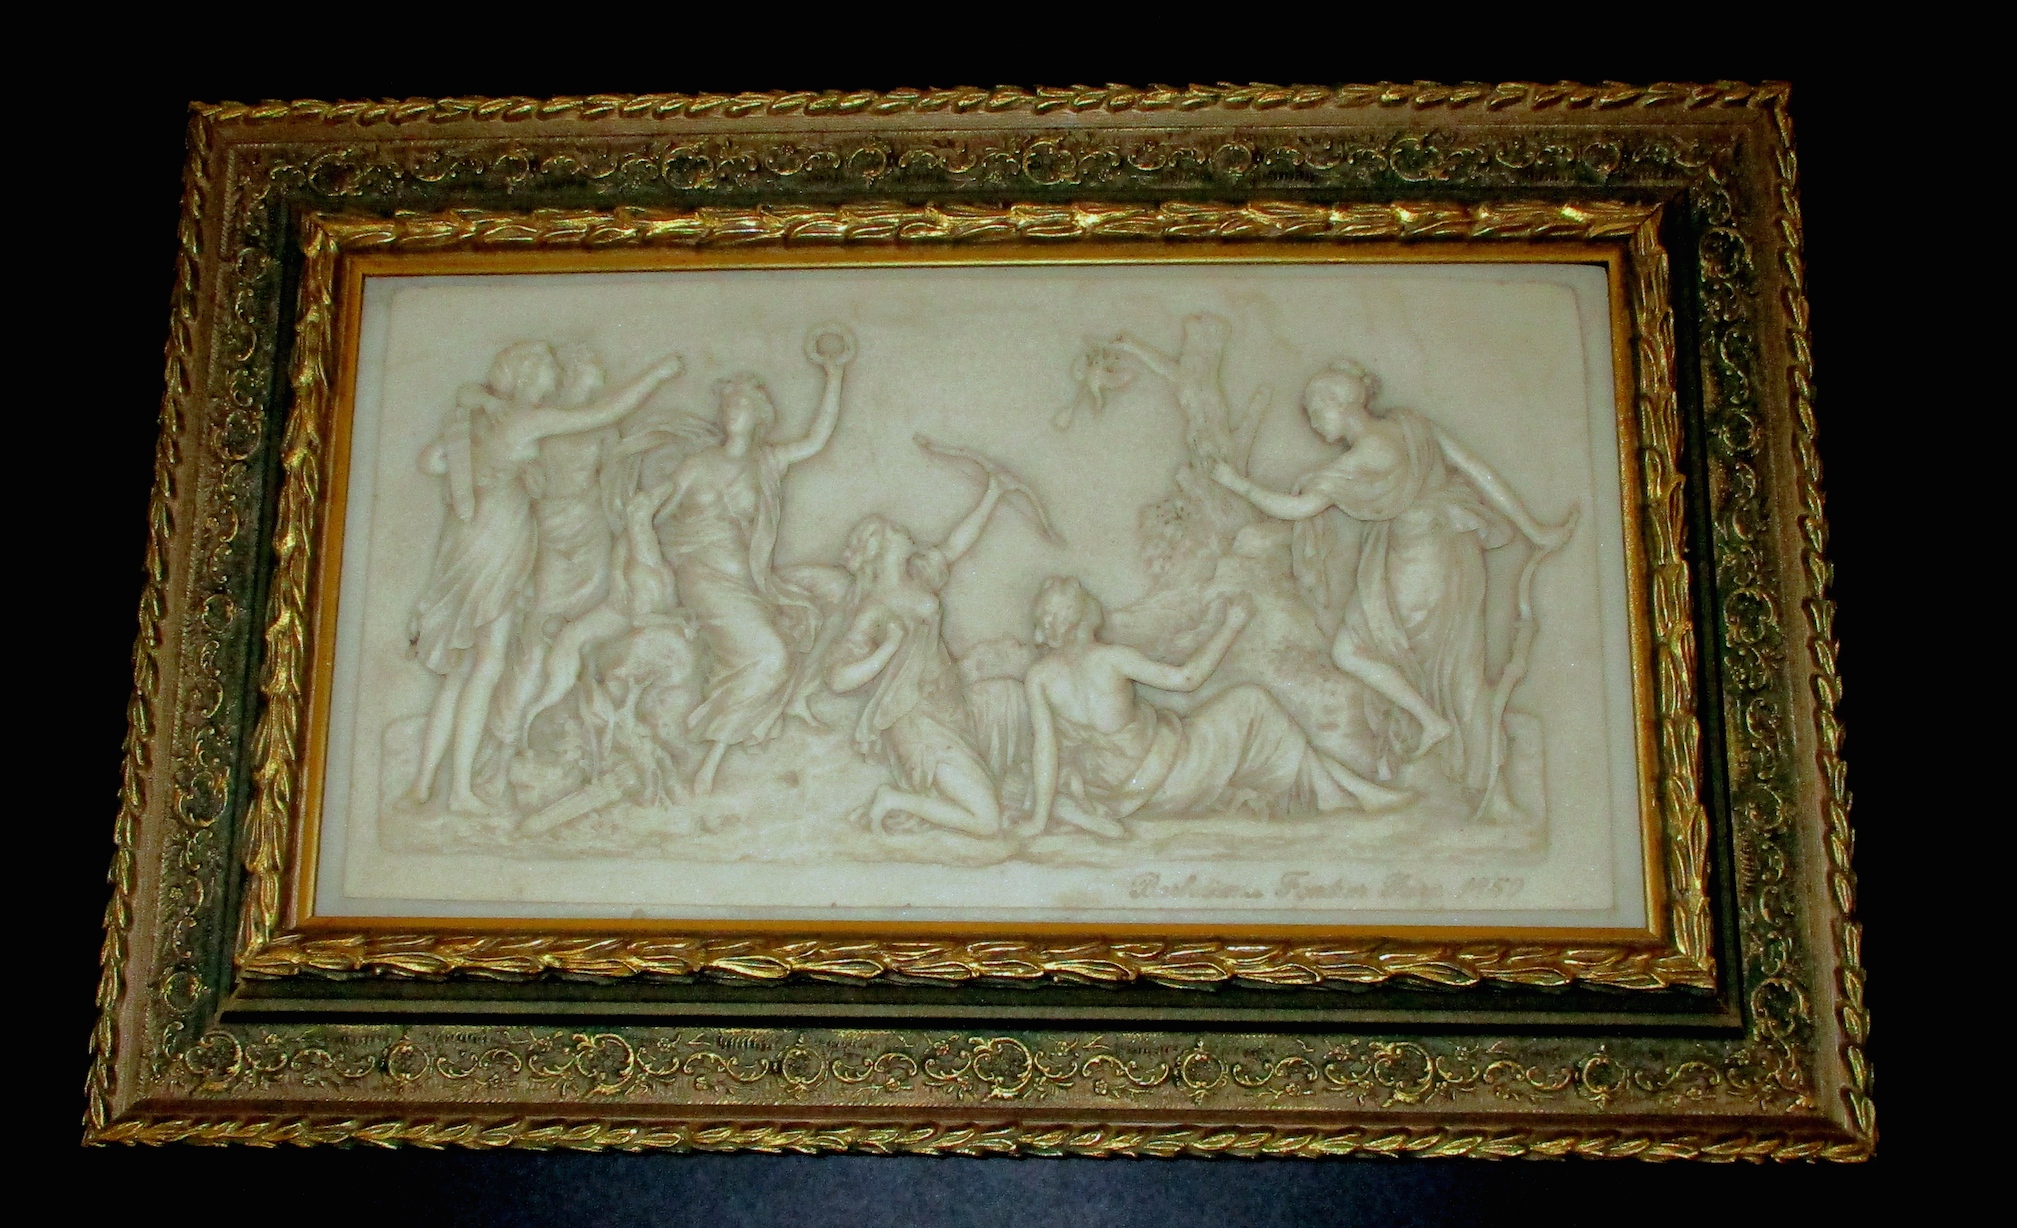 Barbedienne Framed Stone Plaque Signed & Dated 1859